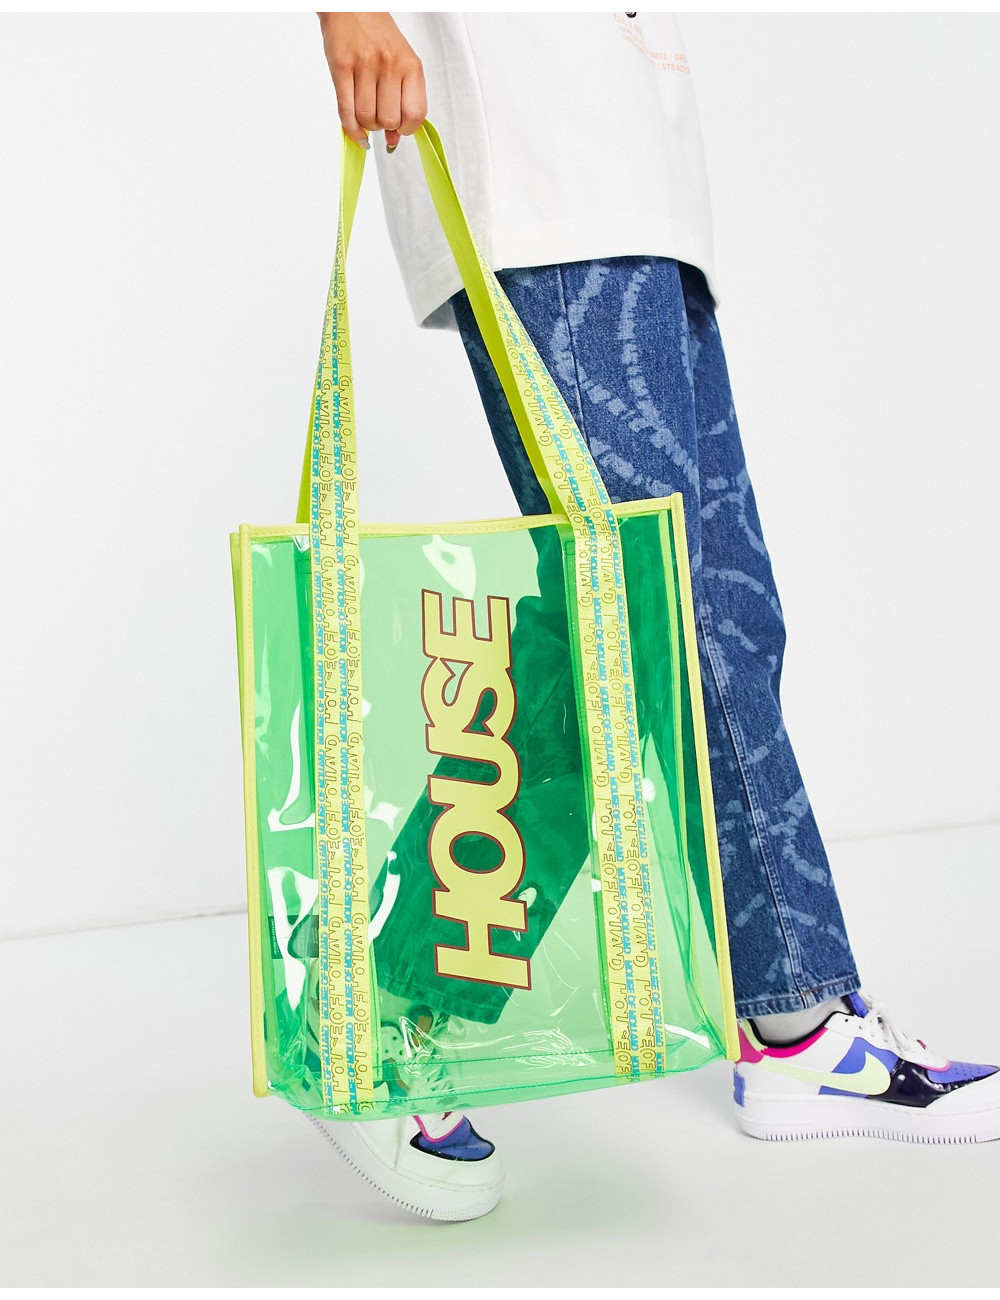 House of Holland pvc tote...